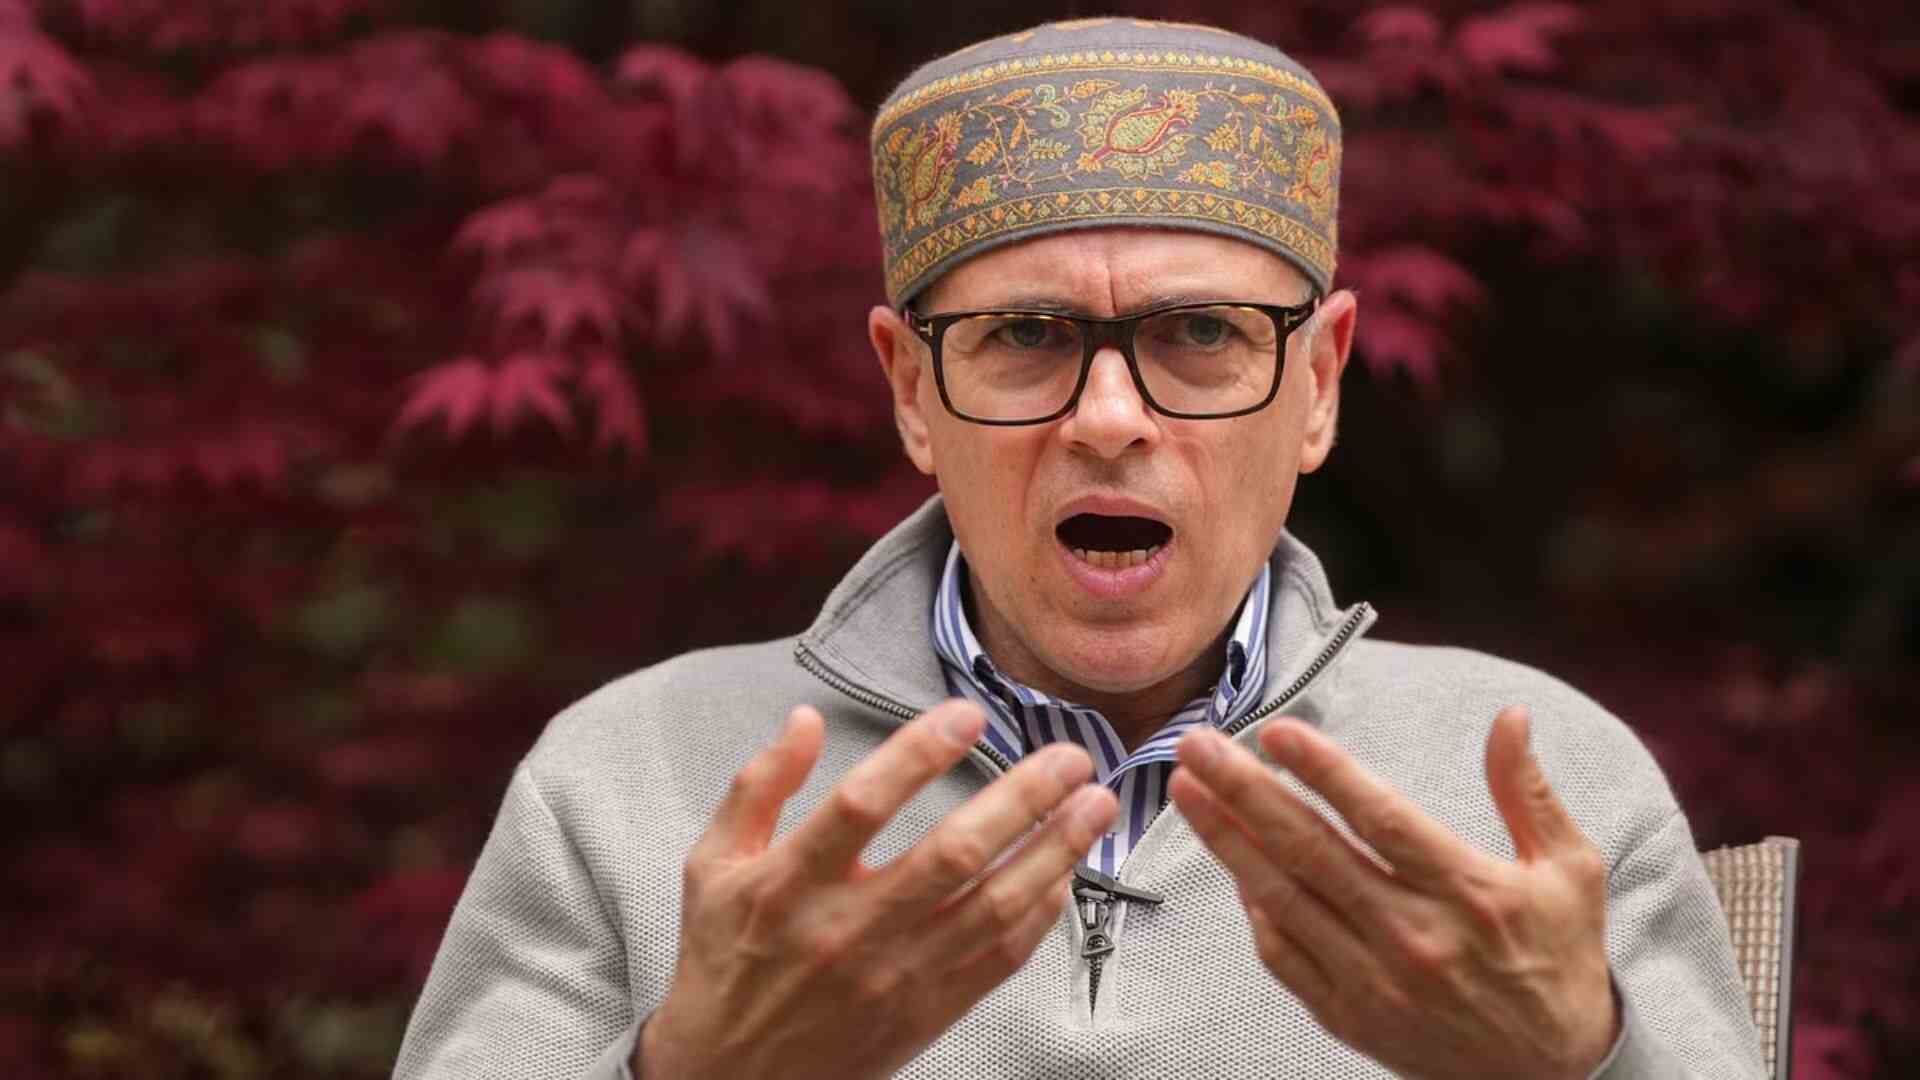 Omar Abdullah has called on Union Home Minister Amit Shah to provide a 